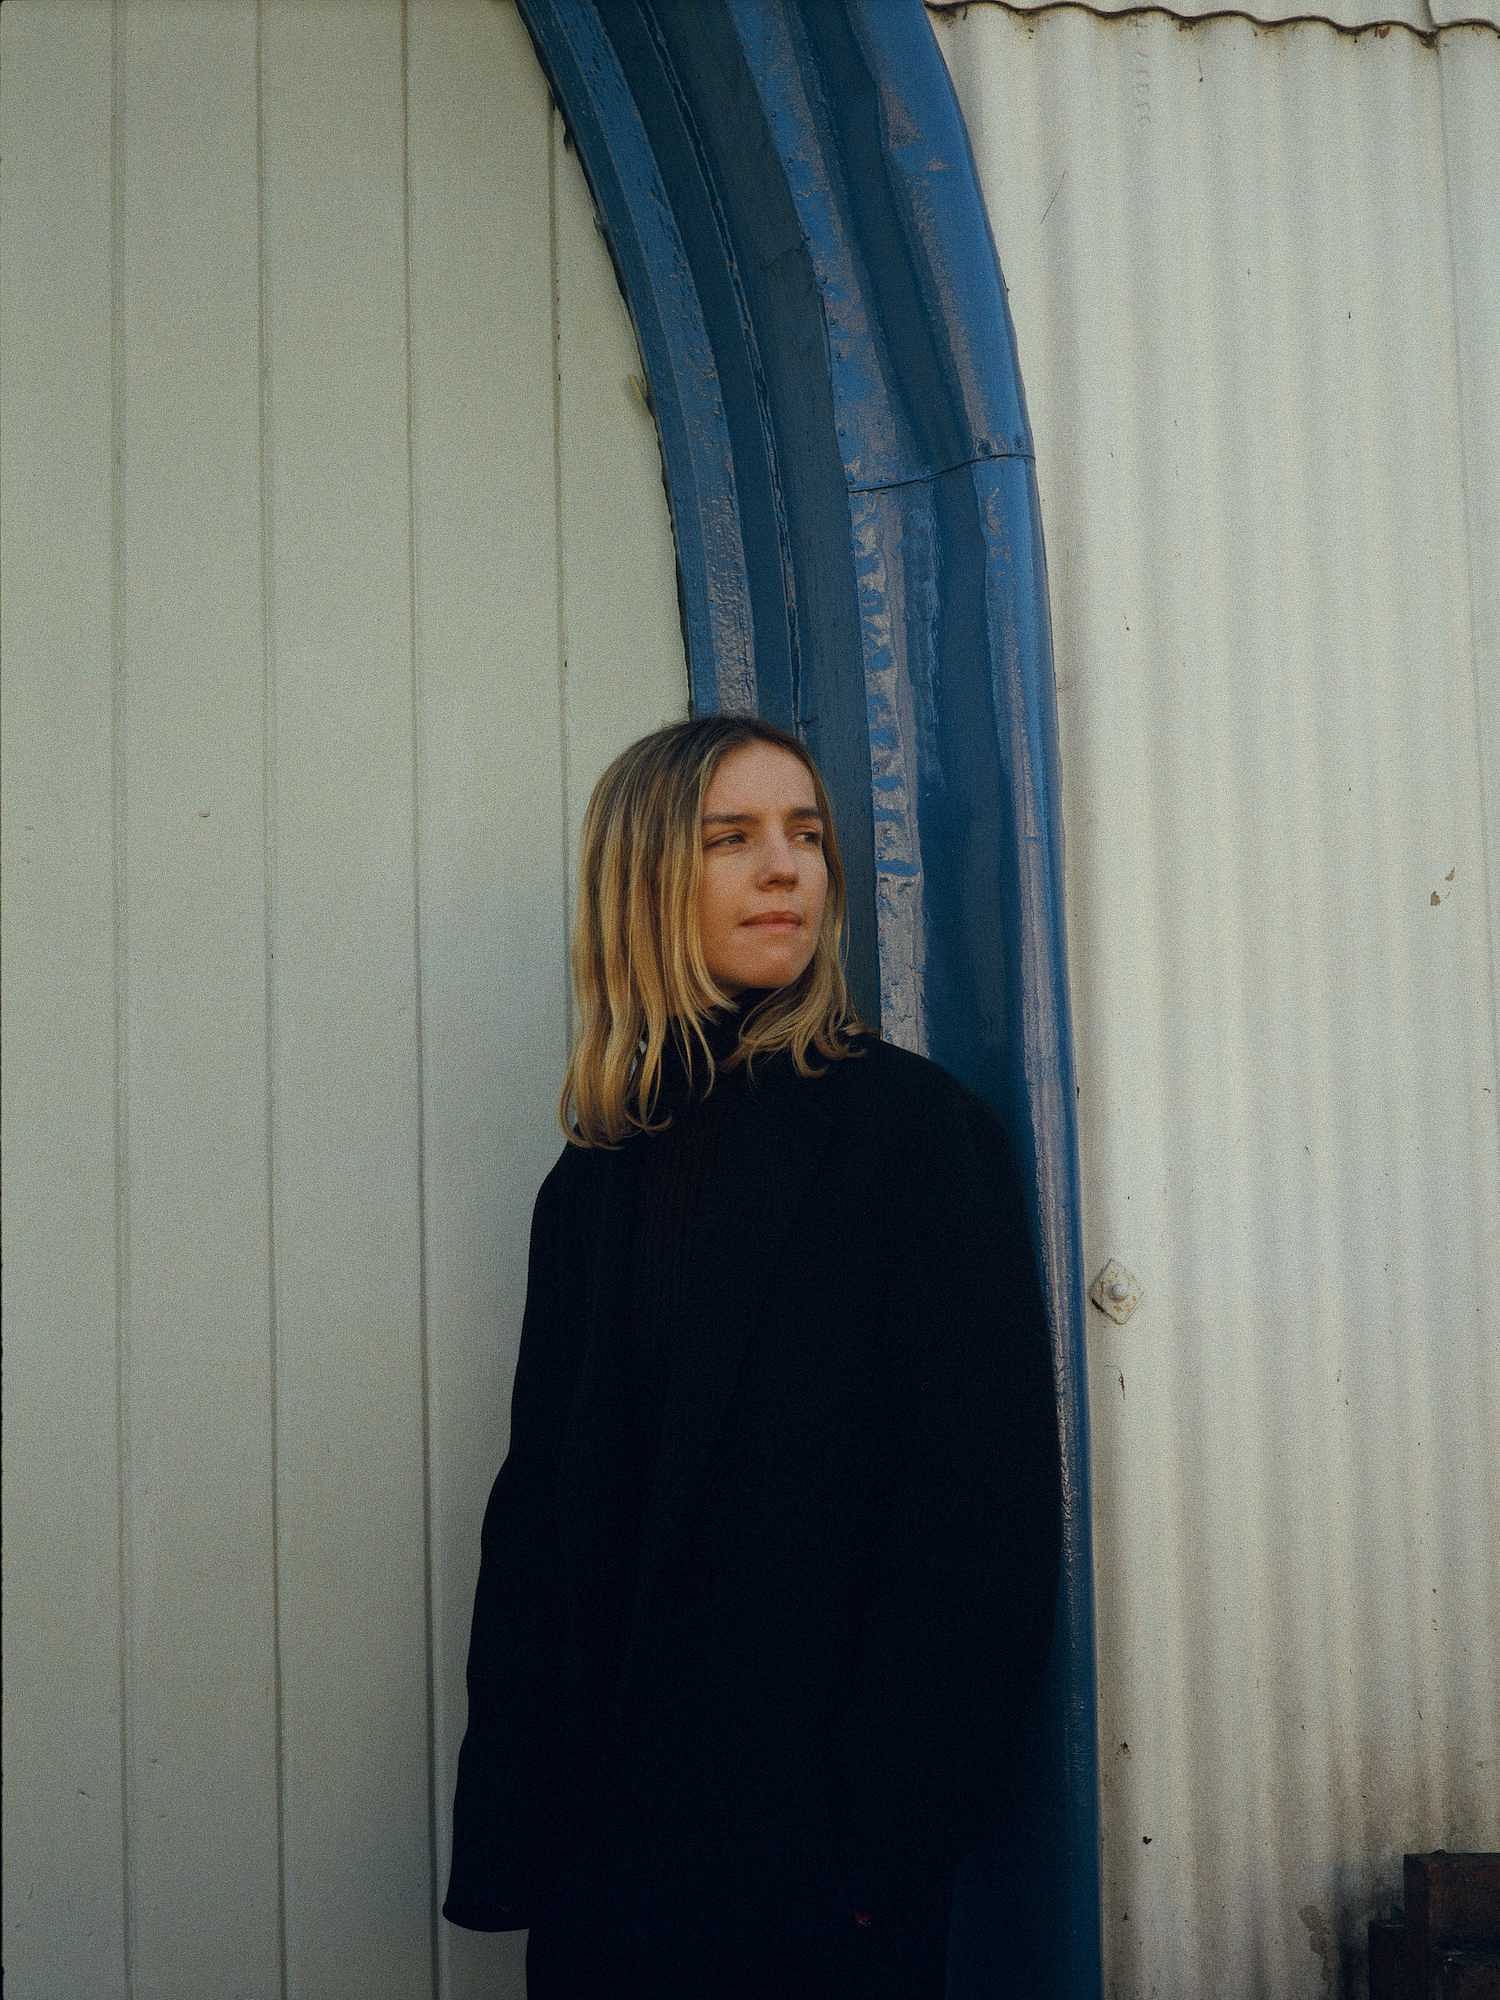 Float on: The Japanese House